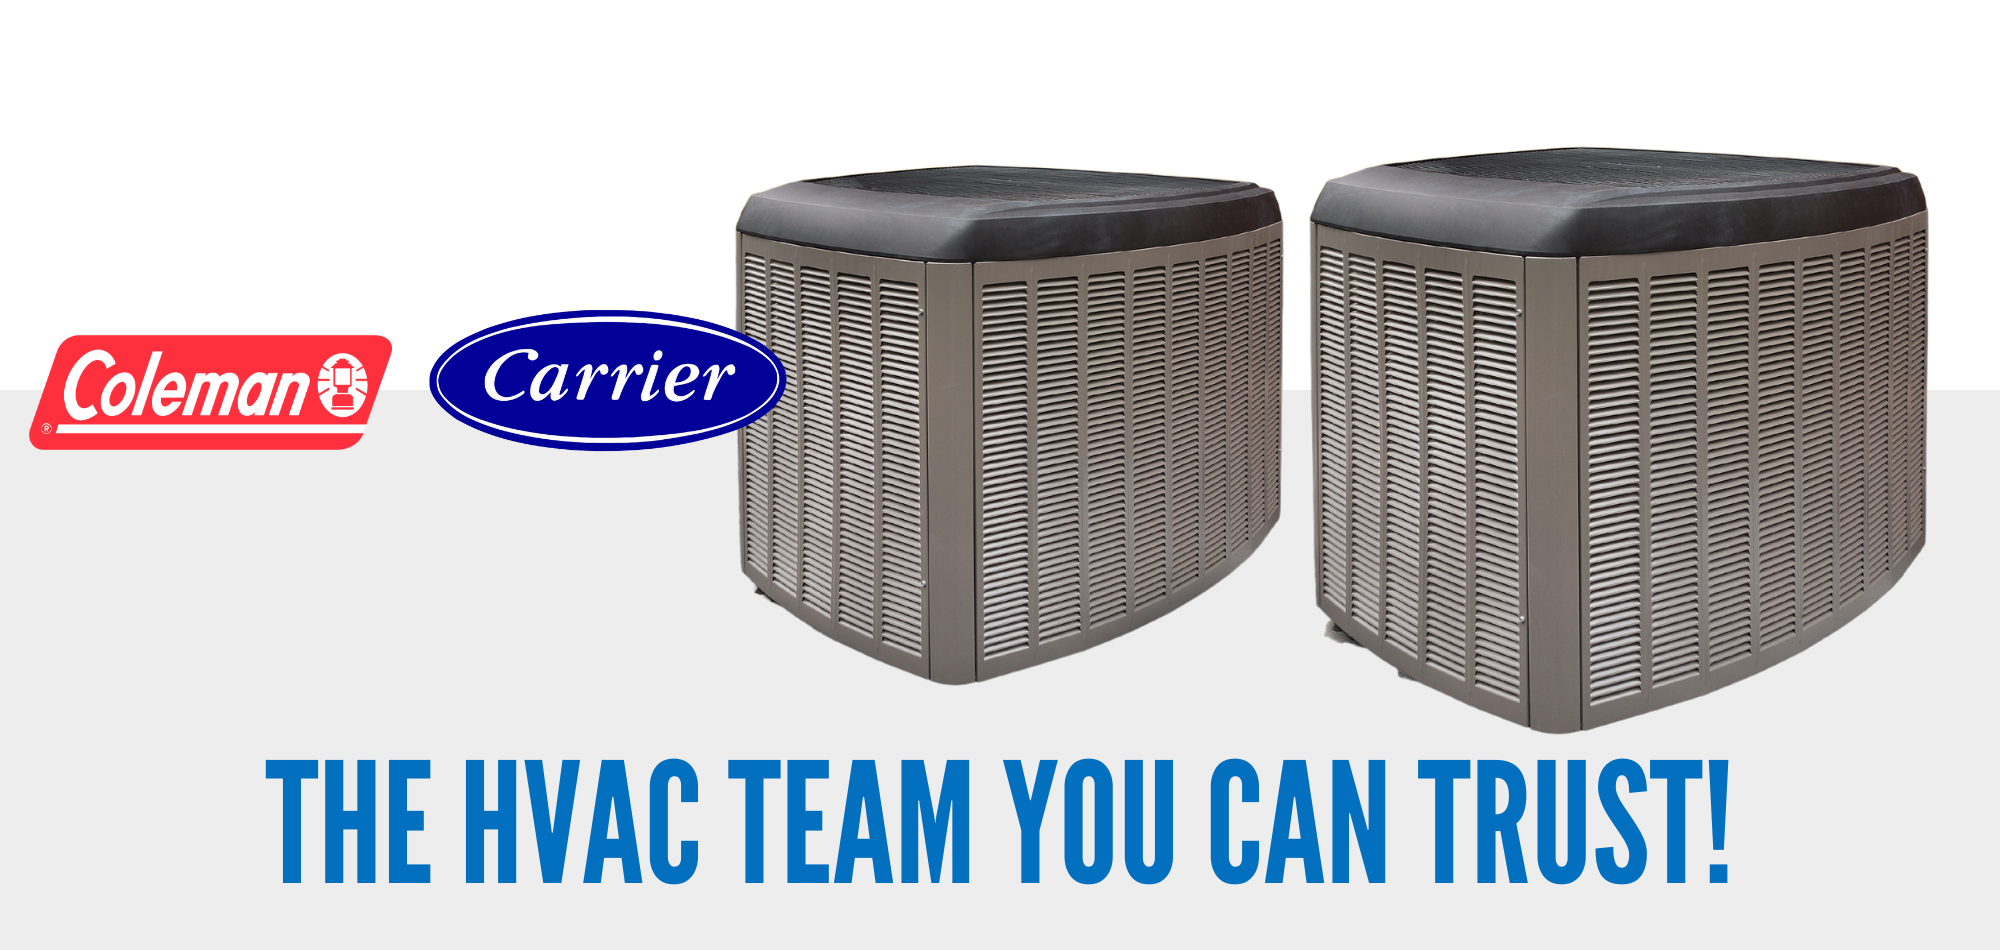 Coleman and Carrier HVAC units